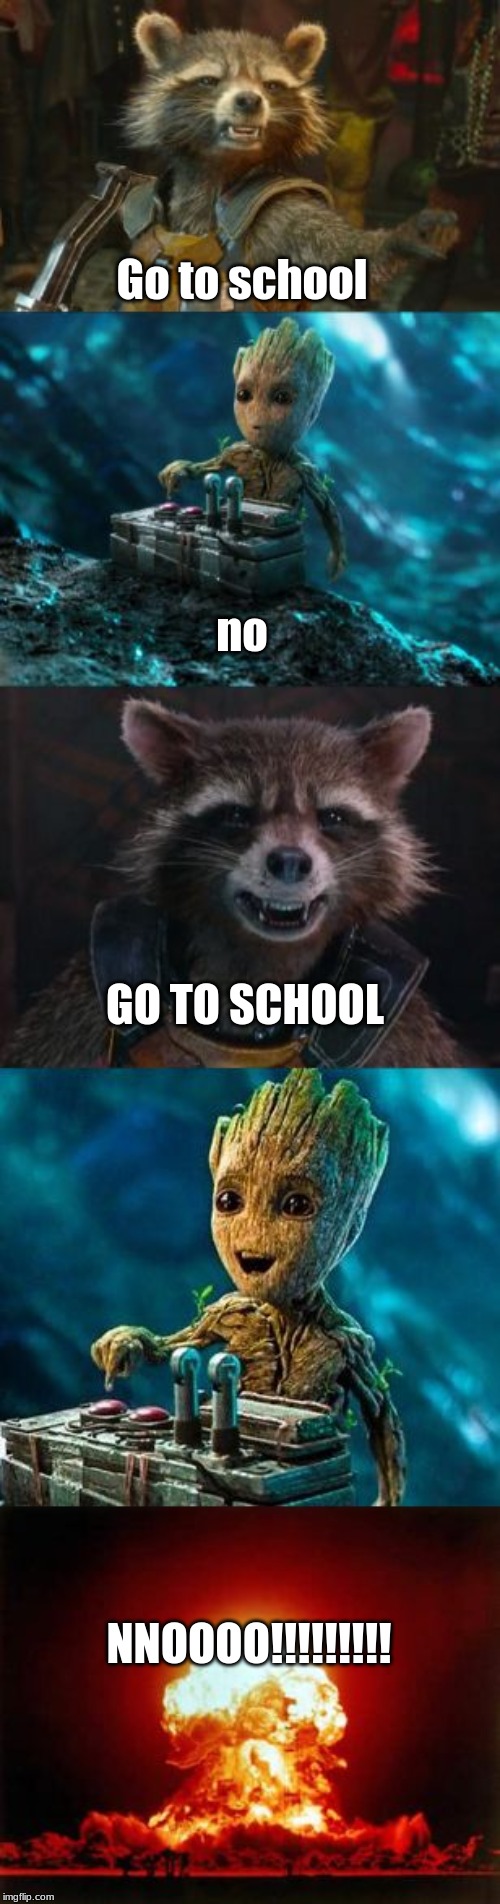 Groot Destroys the Universe | Go to school; no; GO TO SCHOOL; NNOOOO!!!!!!!!! | image tagged in groot destroys the universe | made w/ Imgflip meme maker